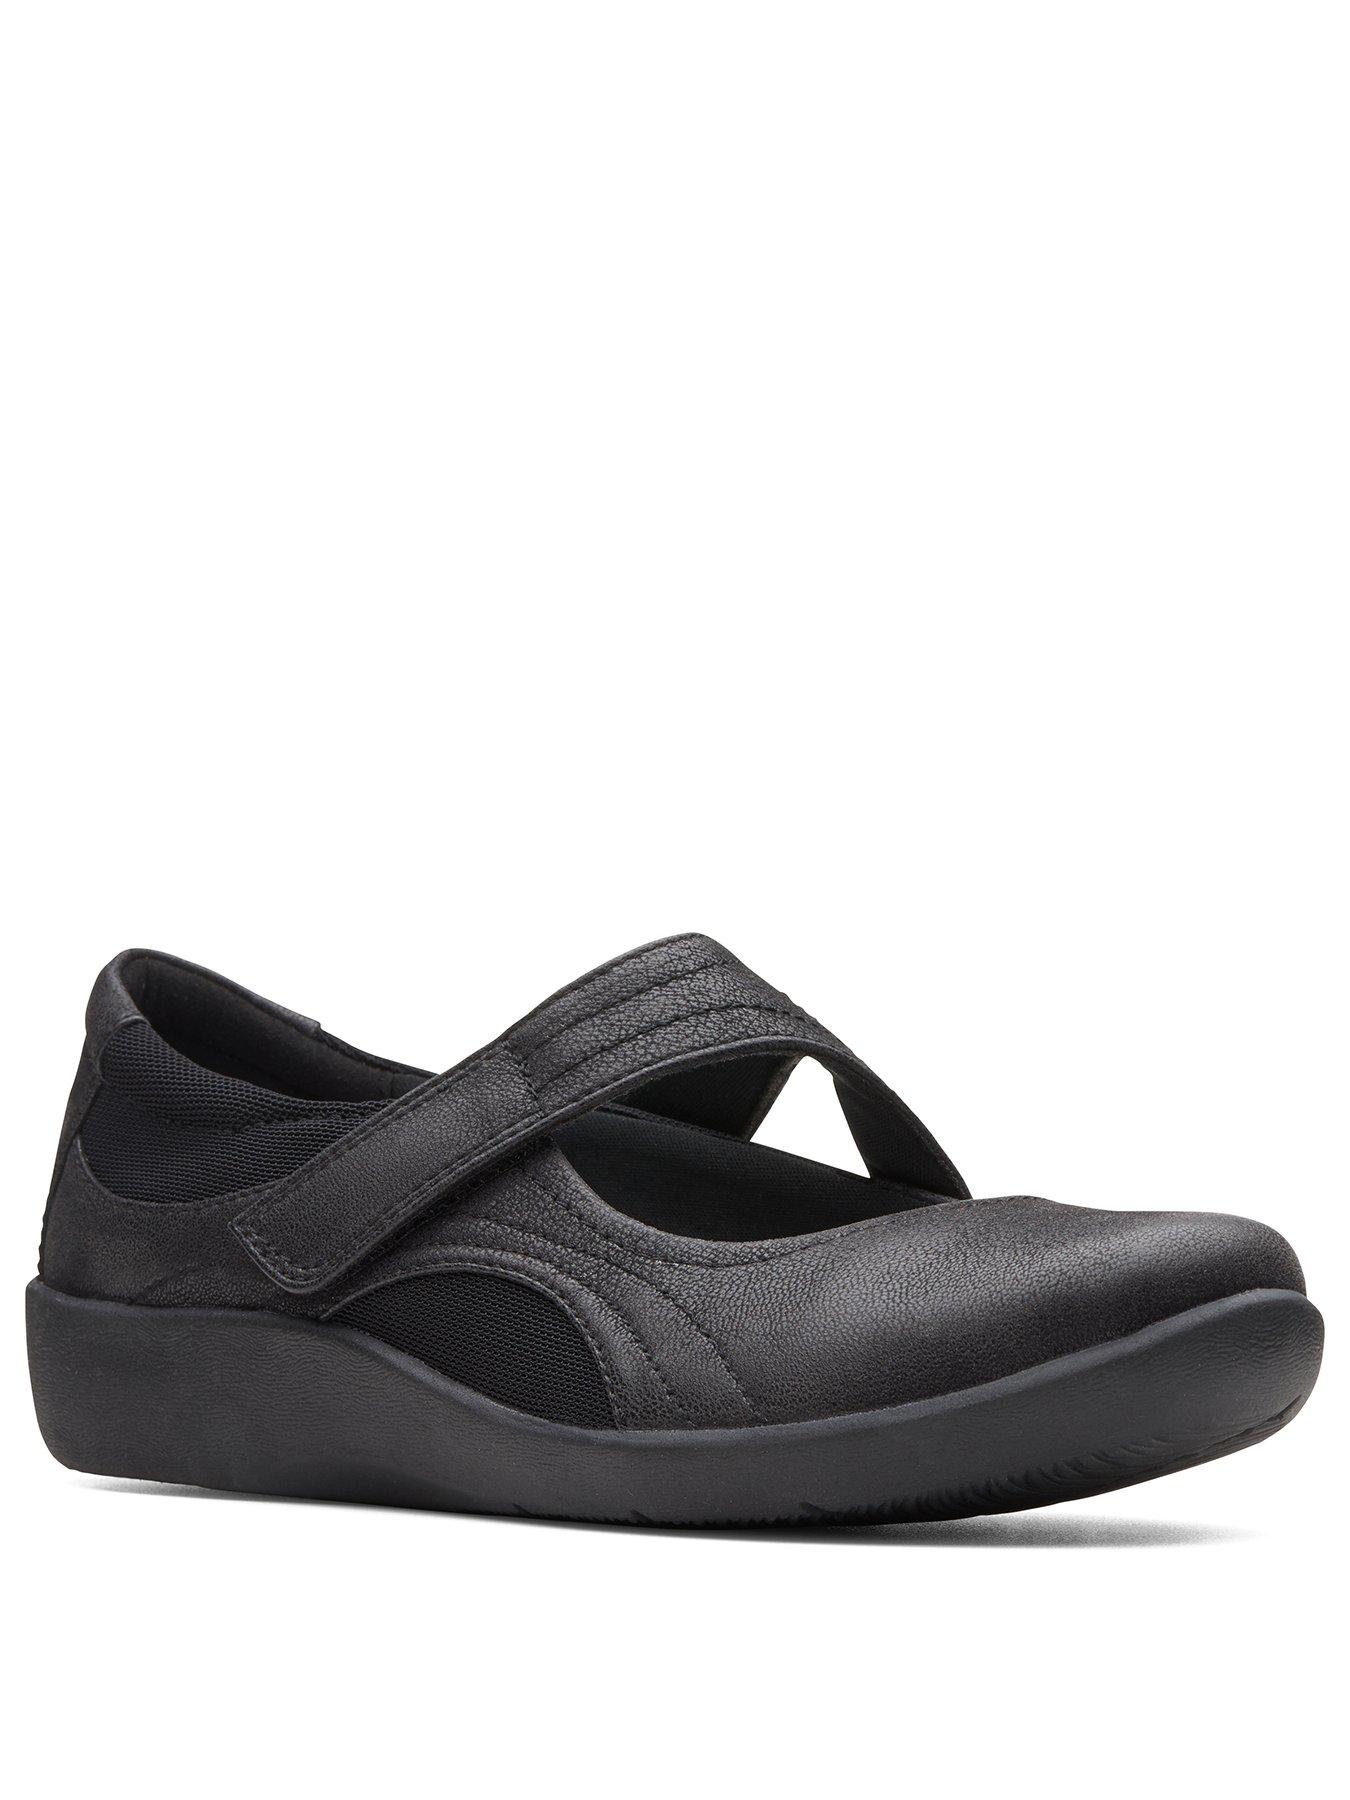 clarks wide fit shoes for ladies